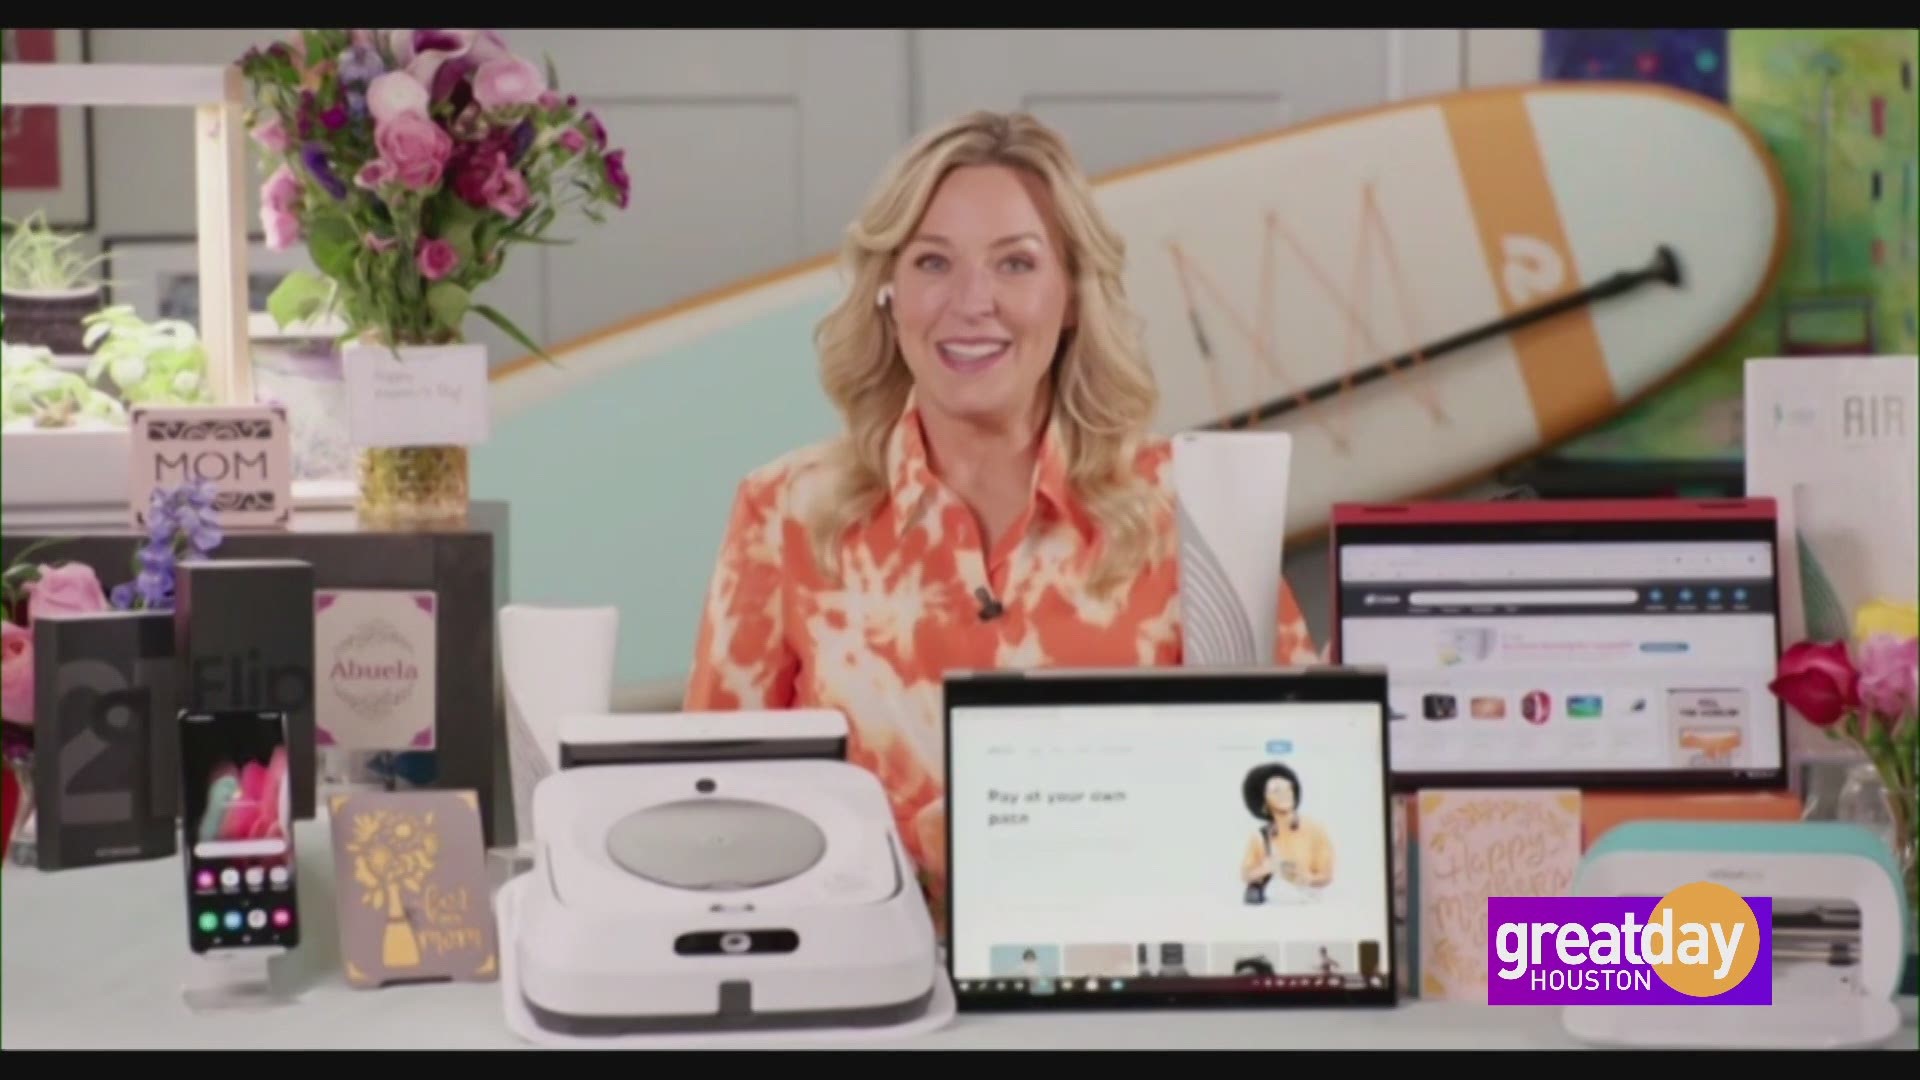 Tech. Expert, Jennifer Jolly, has Mother's Day gift ideas for every type of mom.